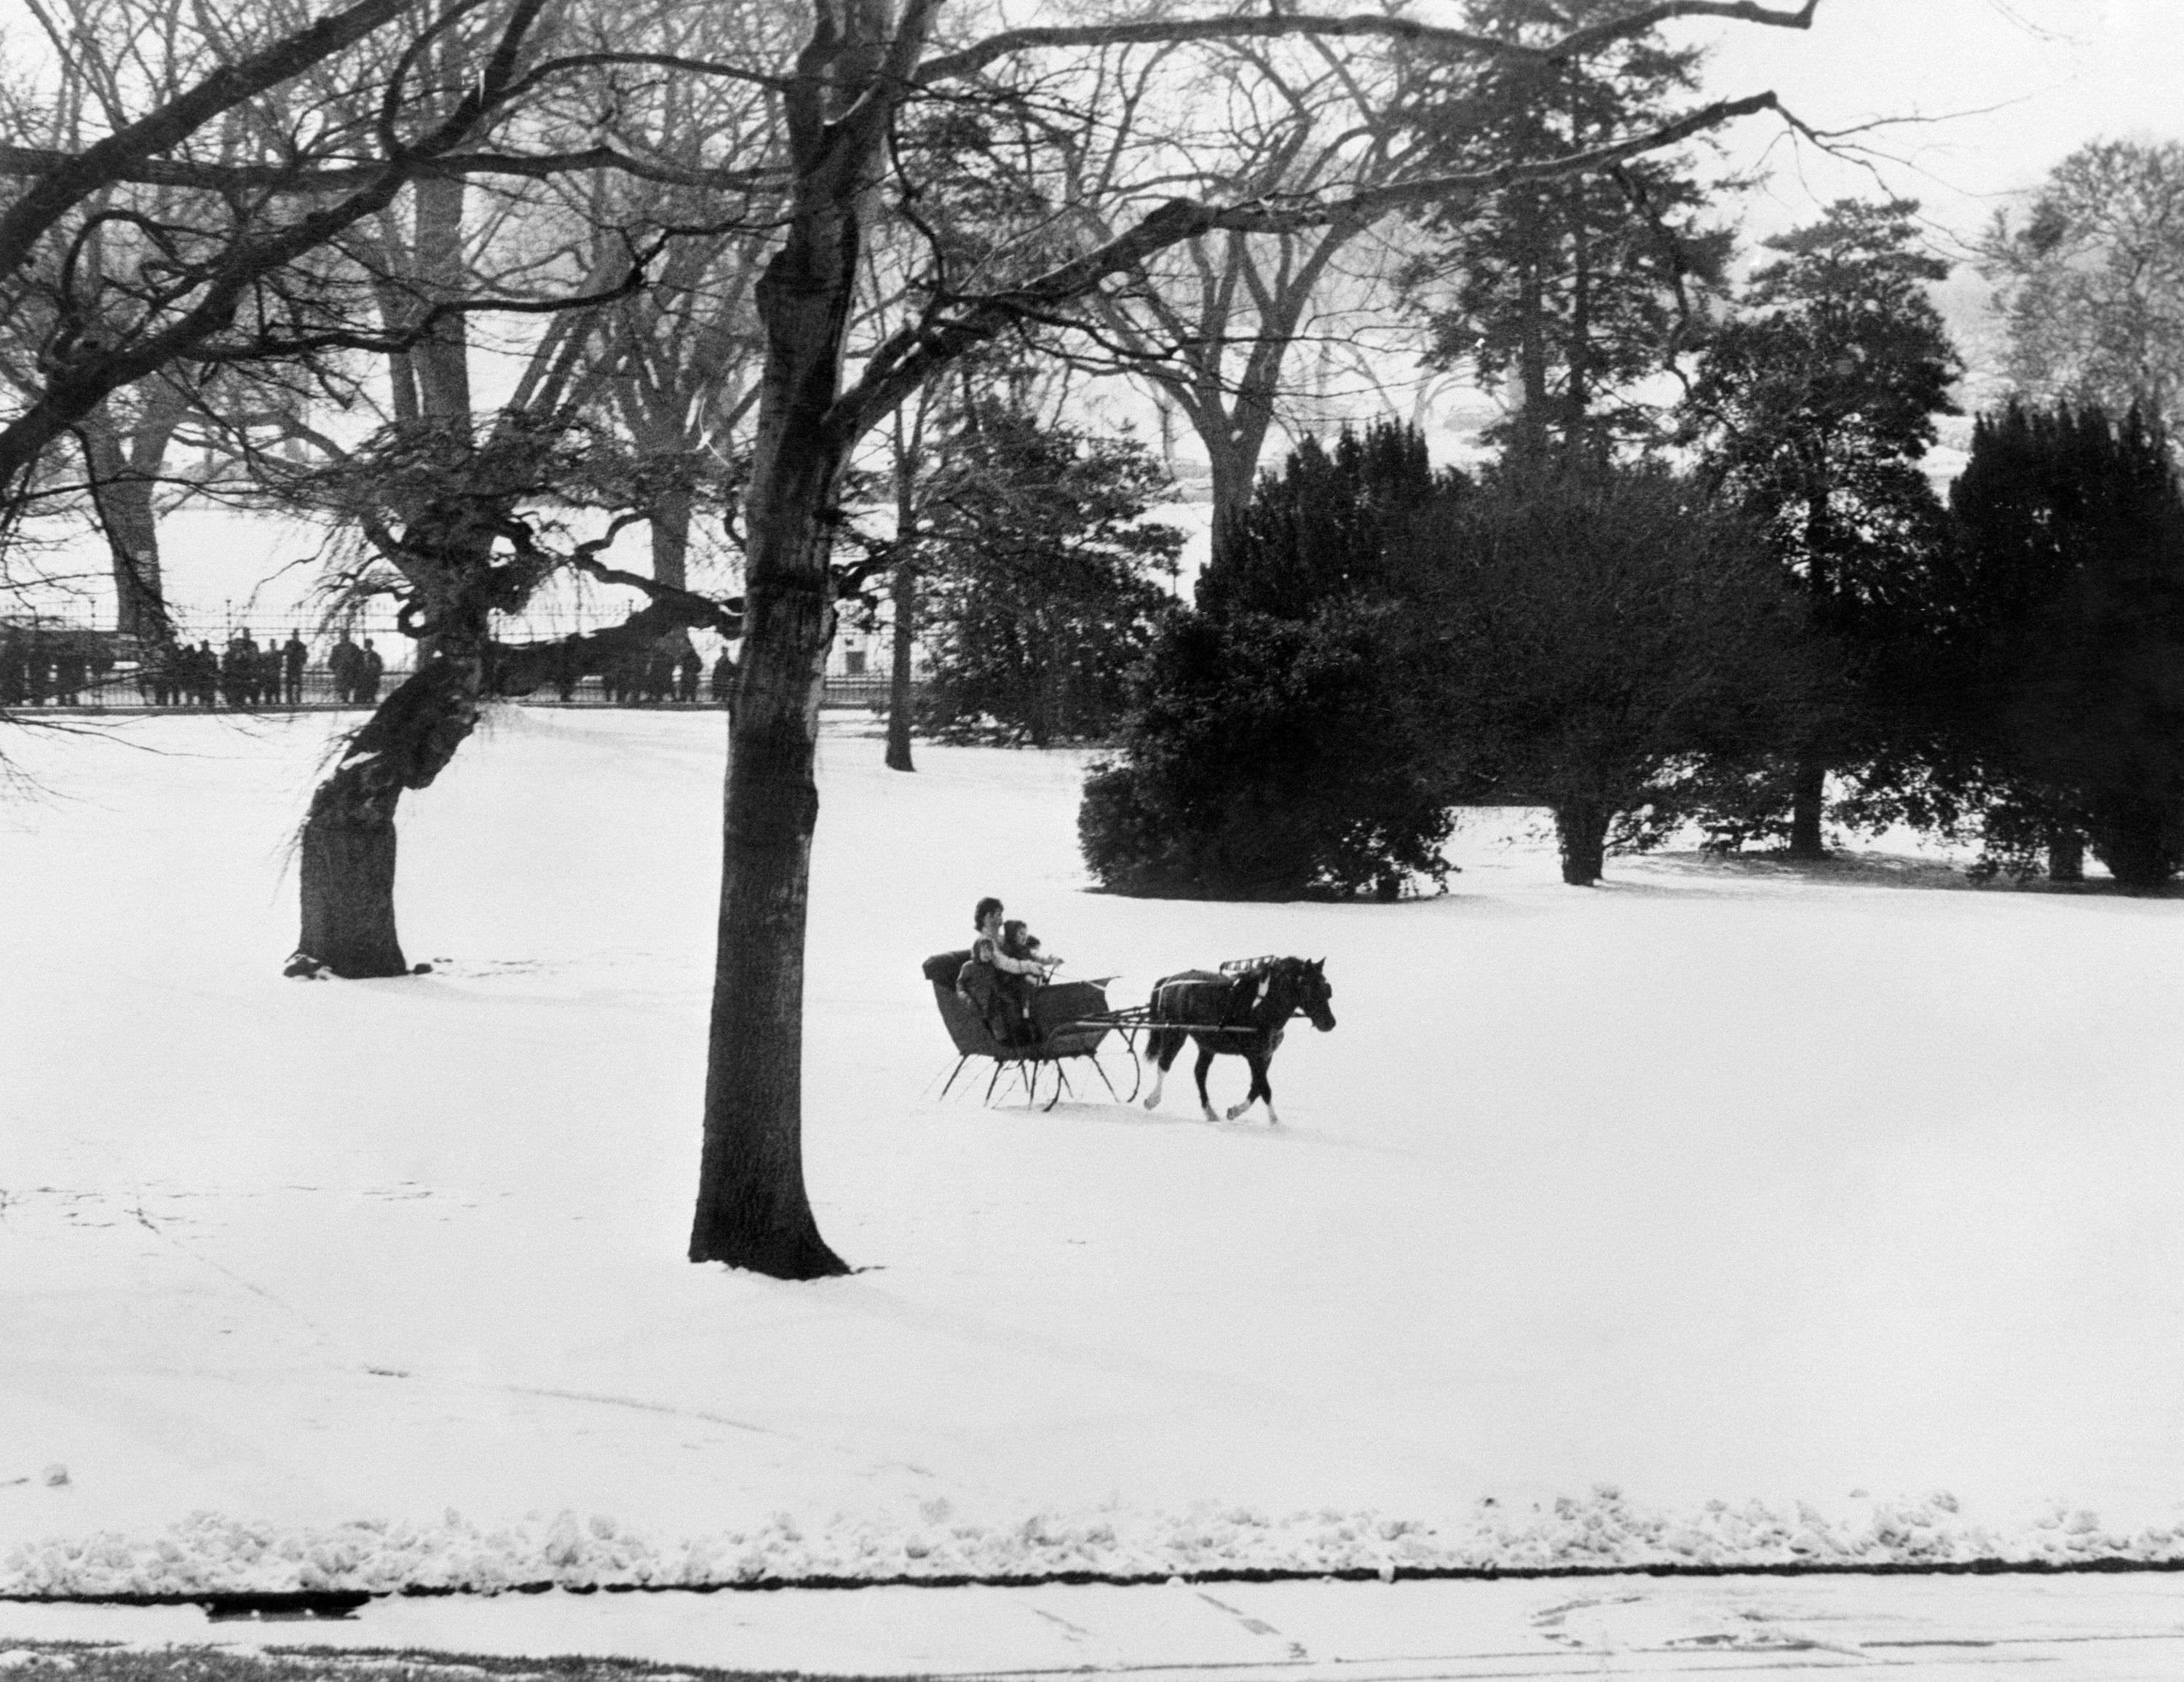 Jacqueline Kennedy takes a a sleigh ride with her children John F. Kennedy, Jr. and Caroline Kennedy